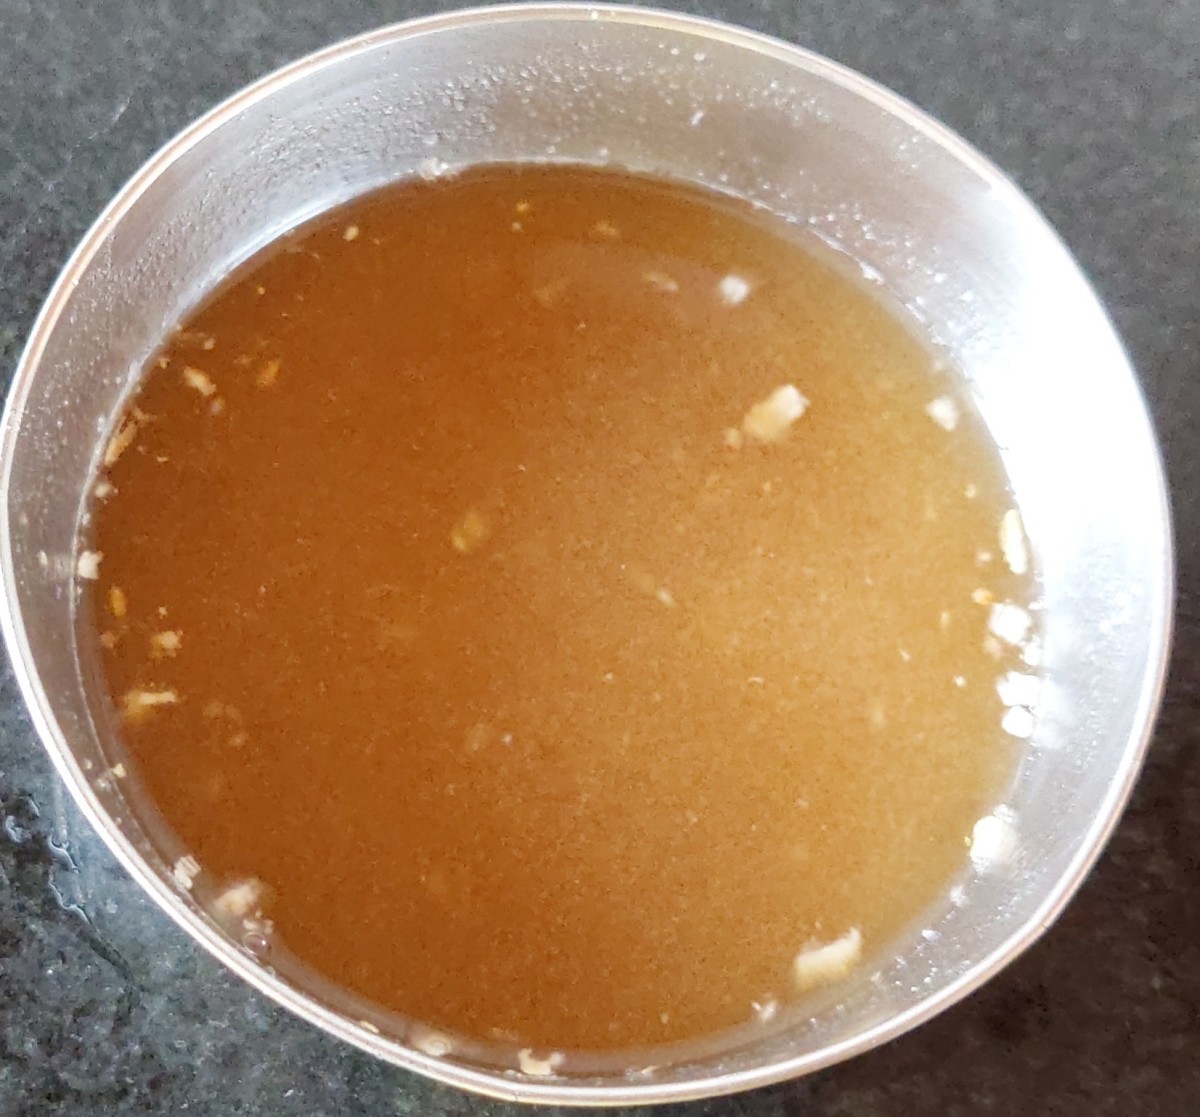 Squeeze tamarind water and discard the residue. Keep tamarind water aside.